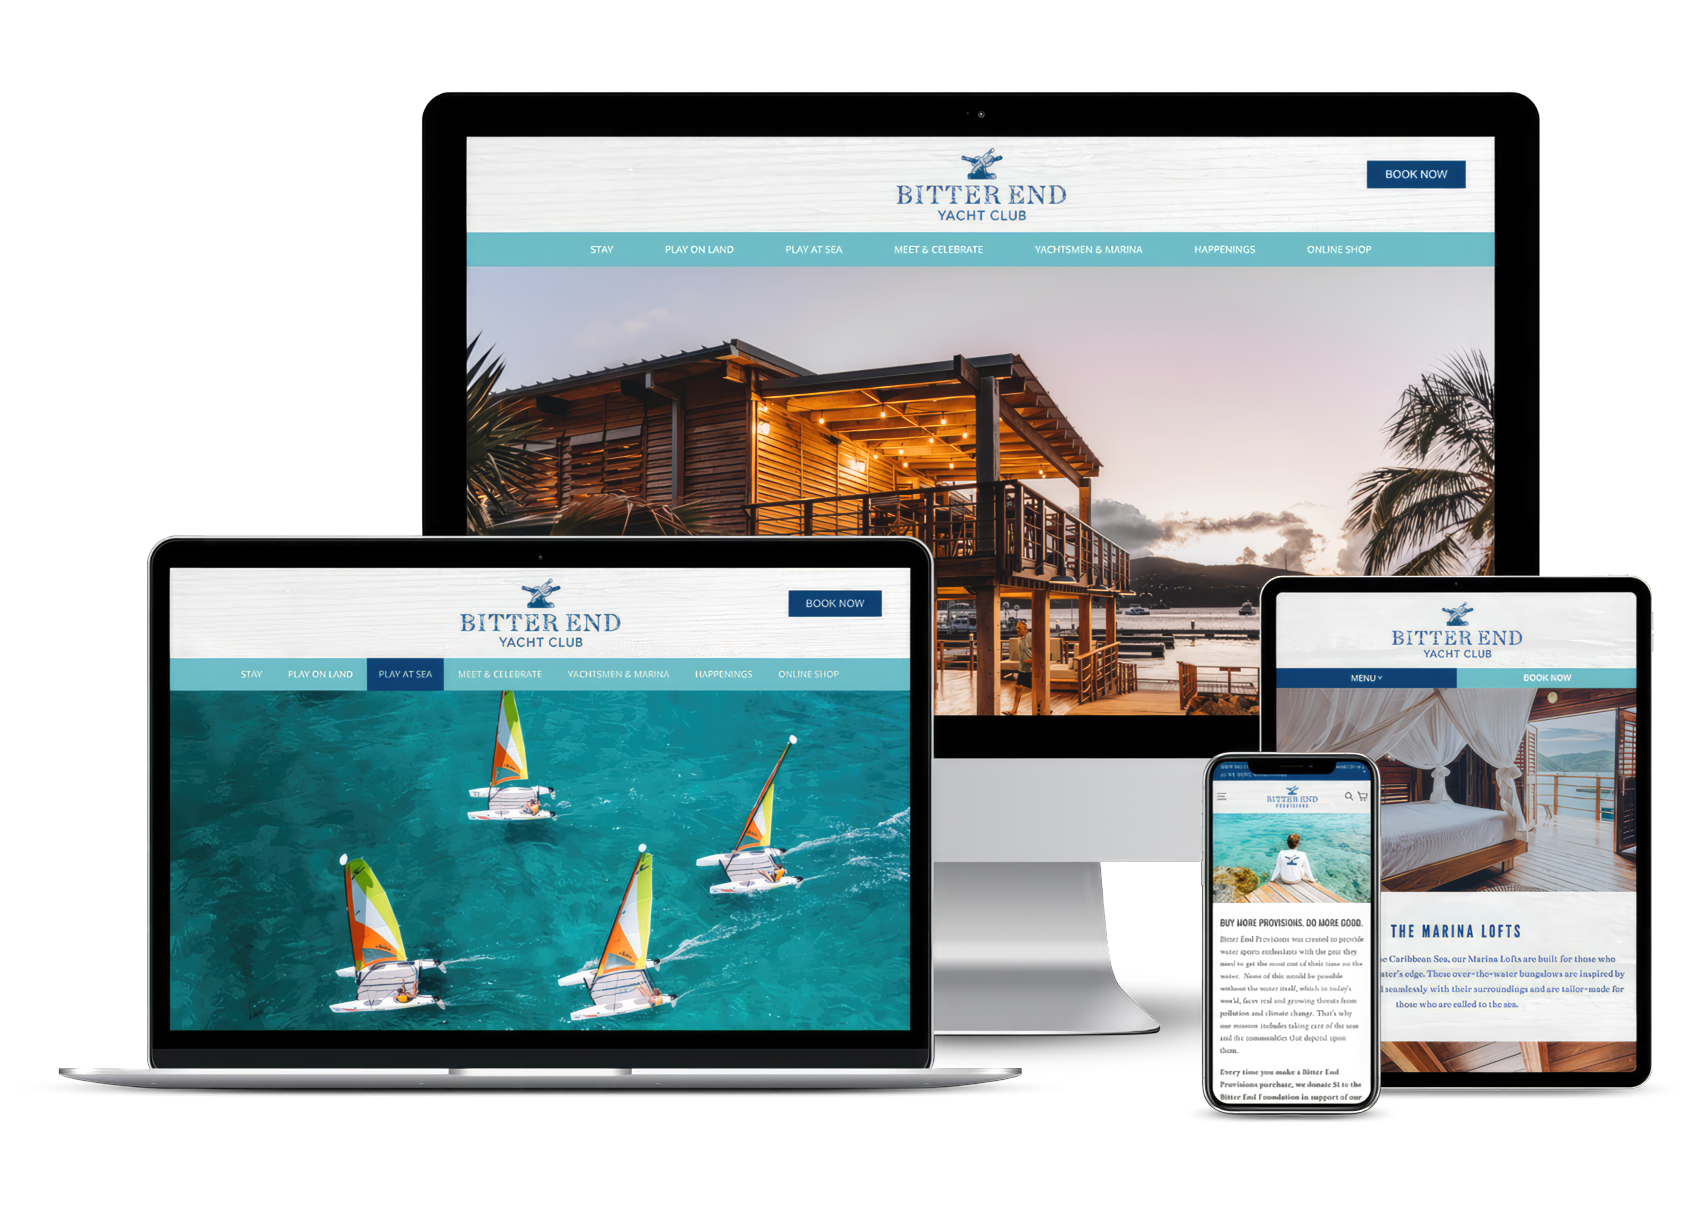 How a New Website Reintroduced a Beloved Yacht Club to the World and Boosted Visitors